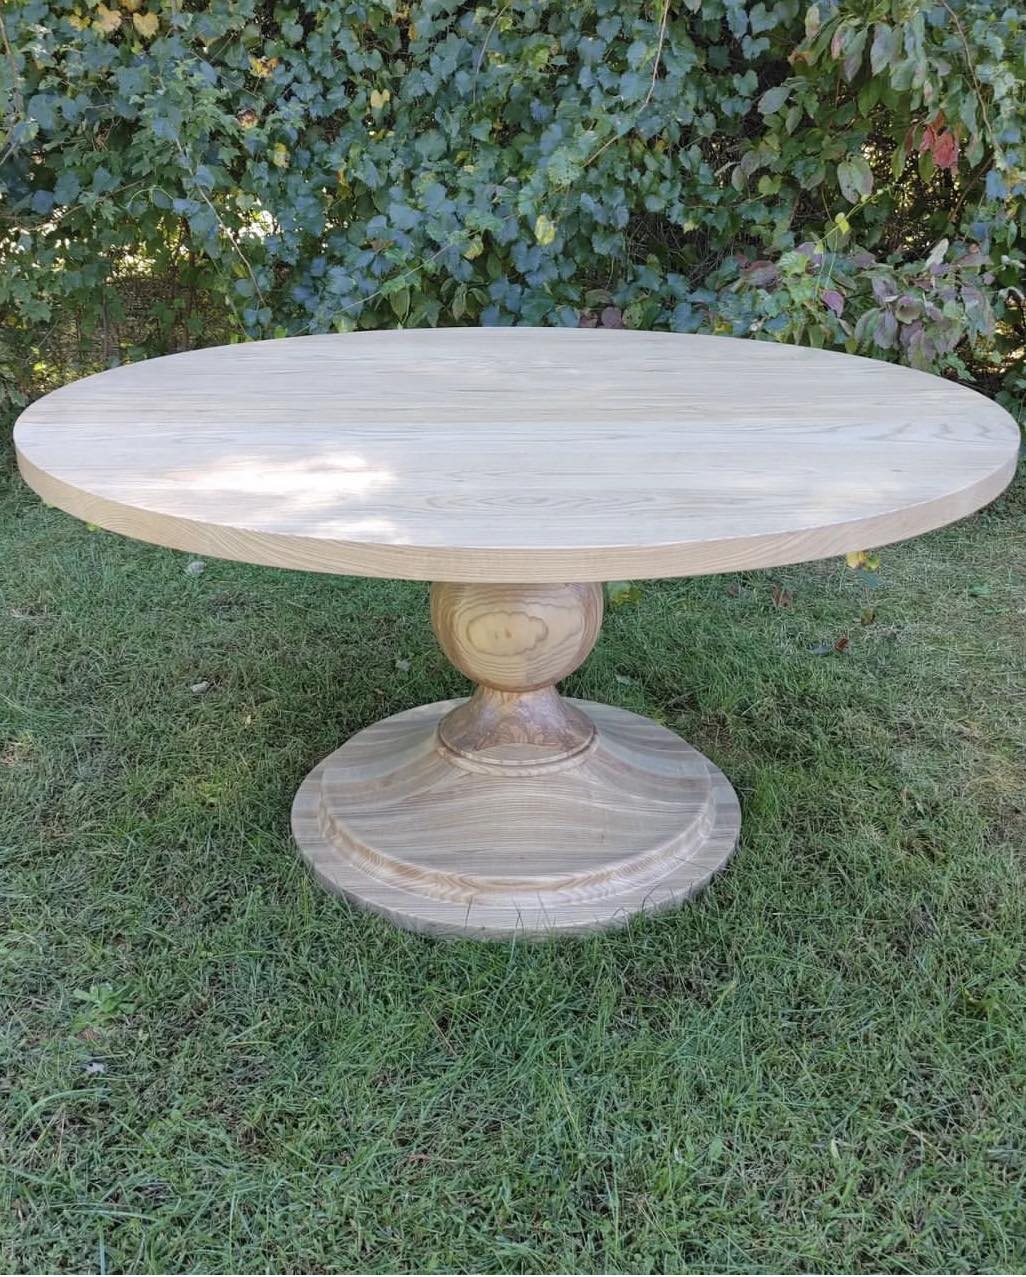 Solid ash 60" circular table with weathered oak stain